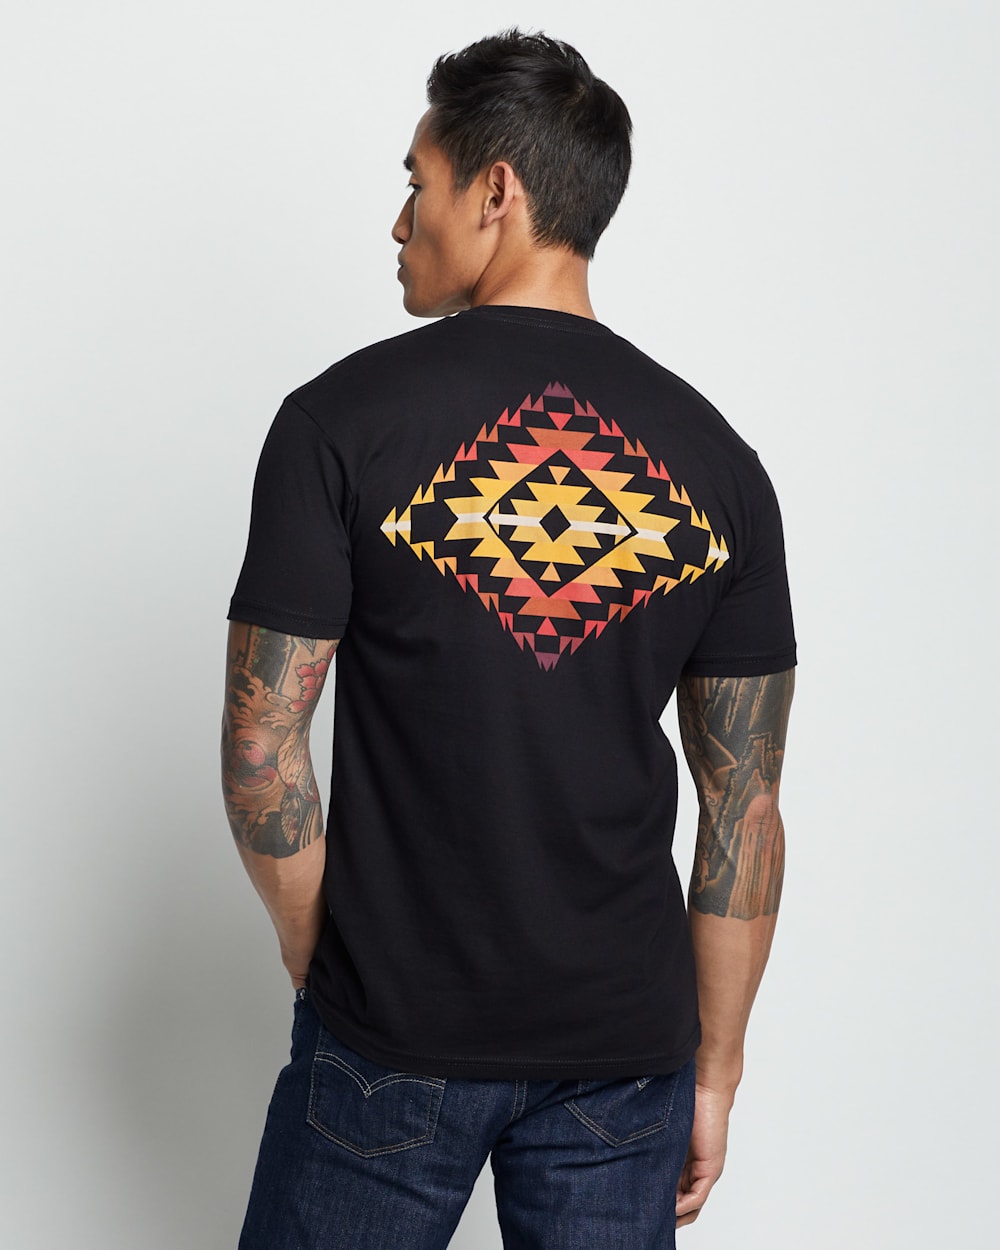 ALTERNATE VIEW OF MEN'S MISSION TRAILS LOGO GRAPHIC TEE IN BLACK/MULTI image number 2